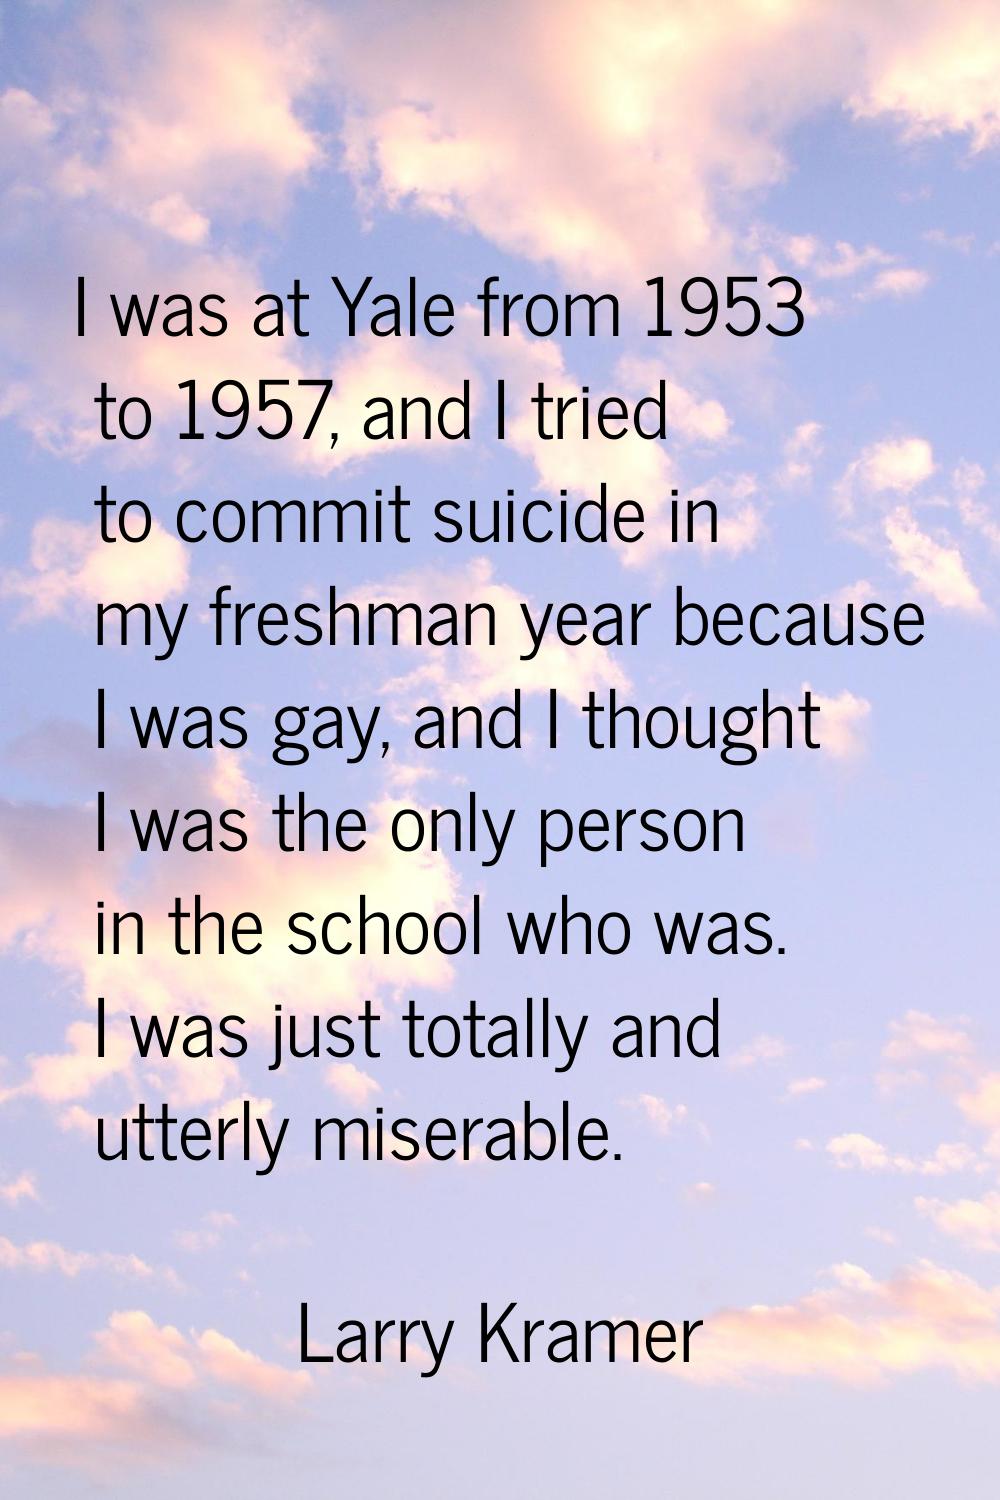 I was at Yale from 1953 to 1957, and I tried to commit suicide in my freshman year because I was ga